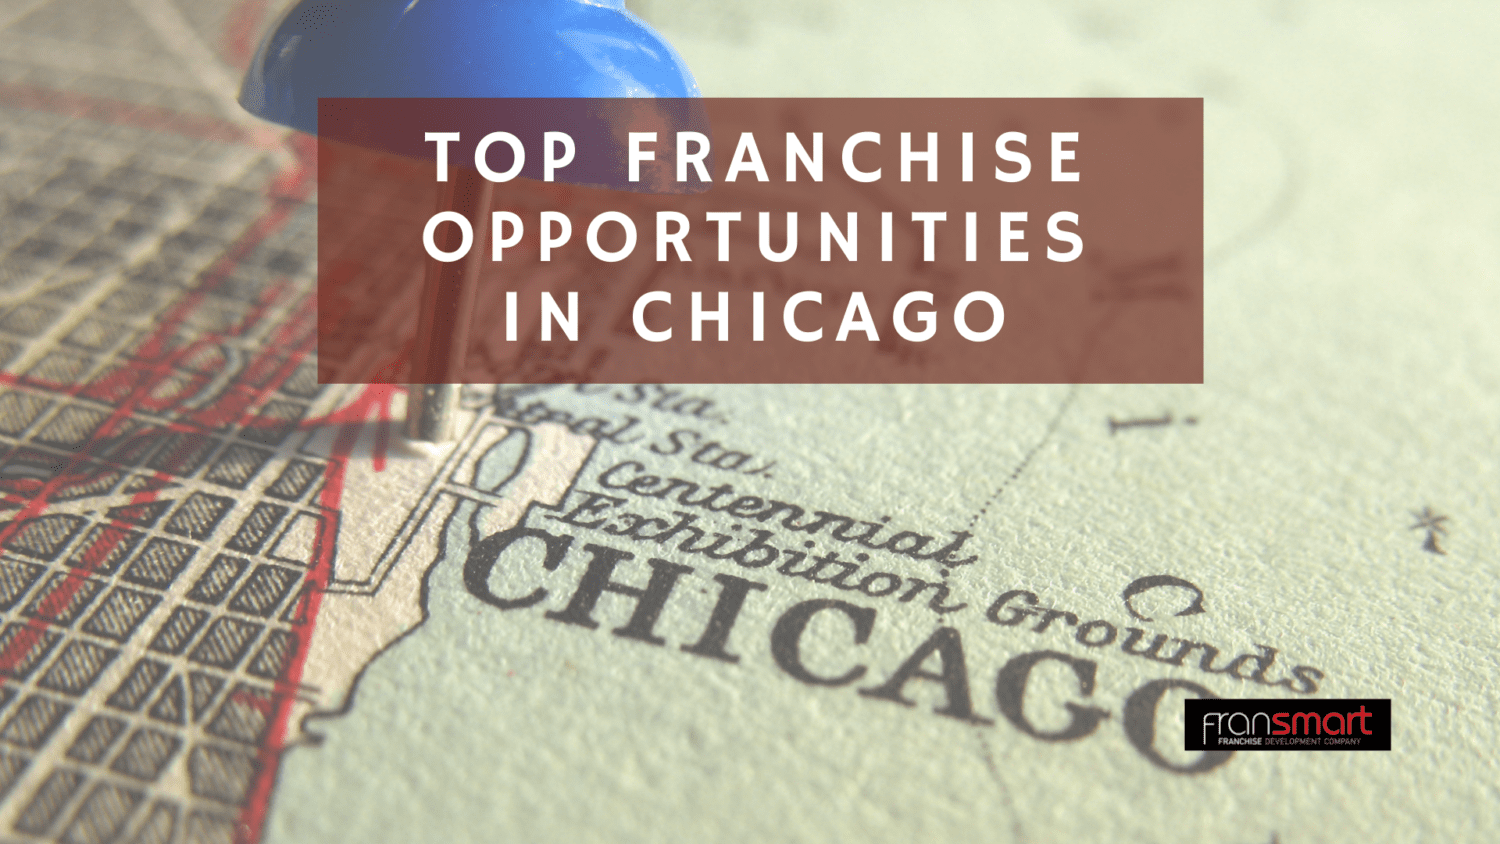 Top 5 Franchise Opportunities in Chicago